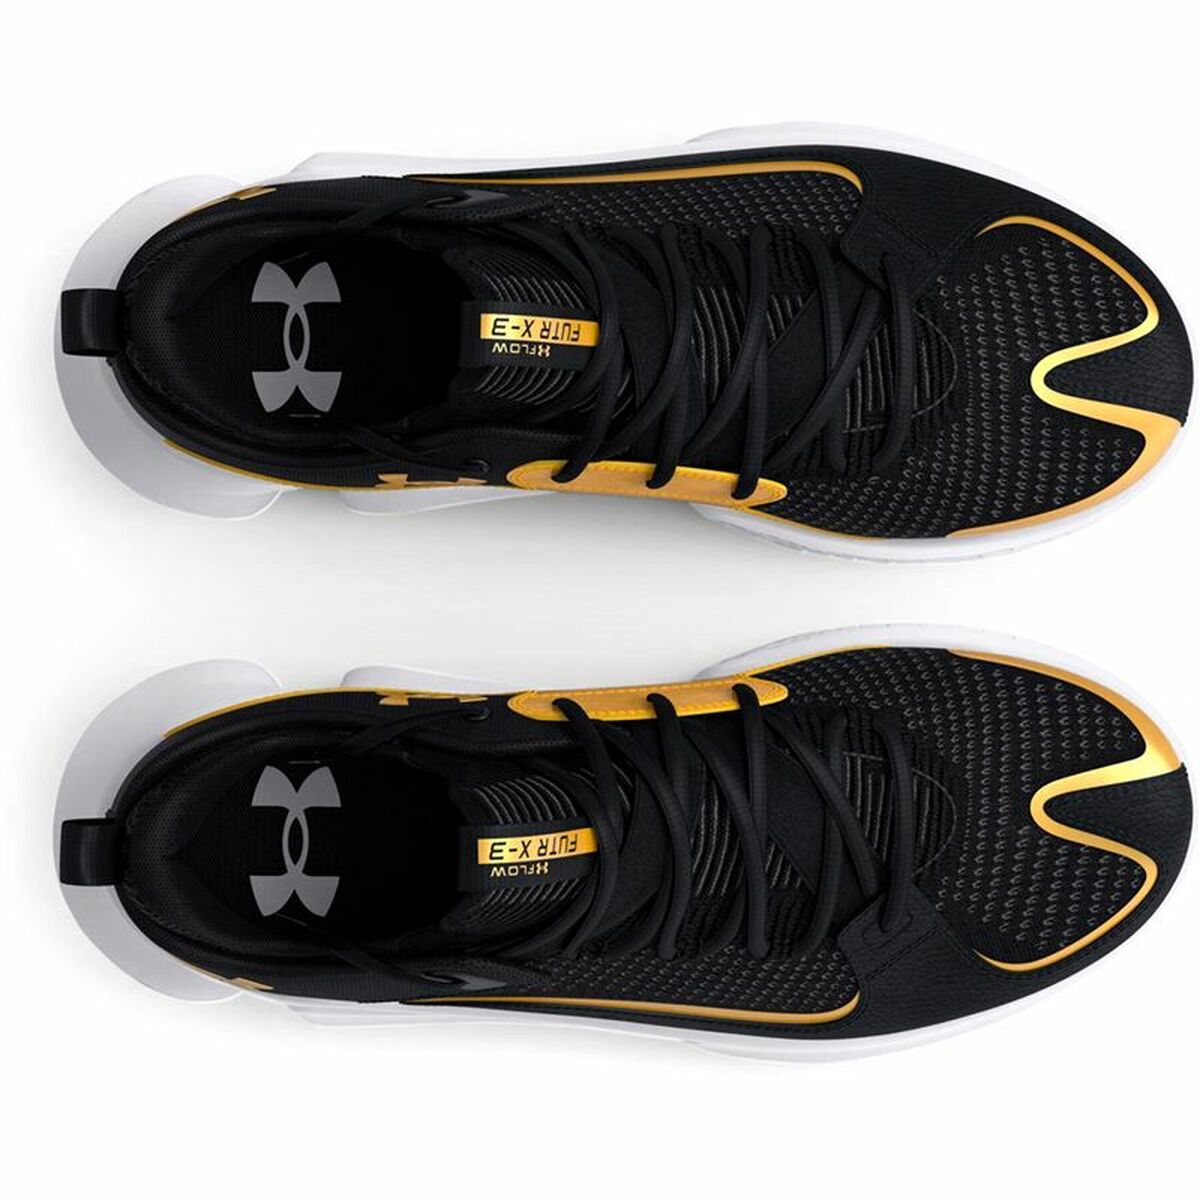 Basketball Shoes for Adults Under Armour Flow Futr X  Black